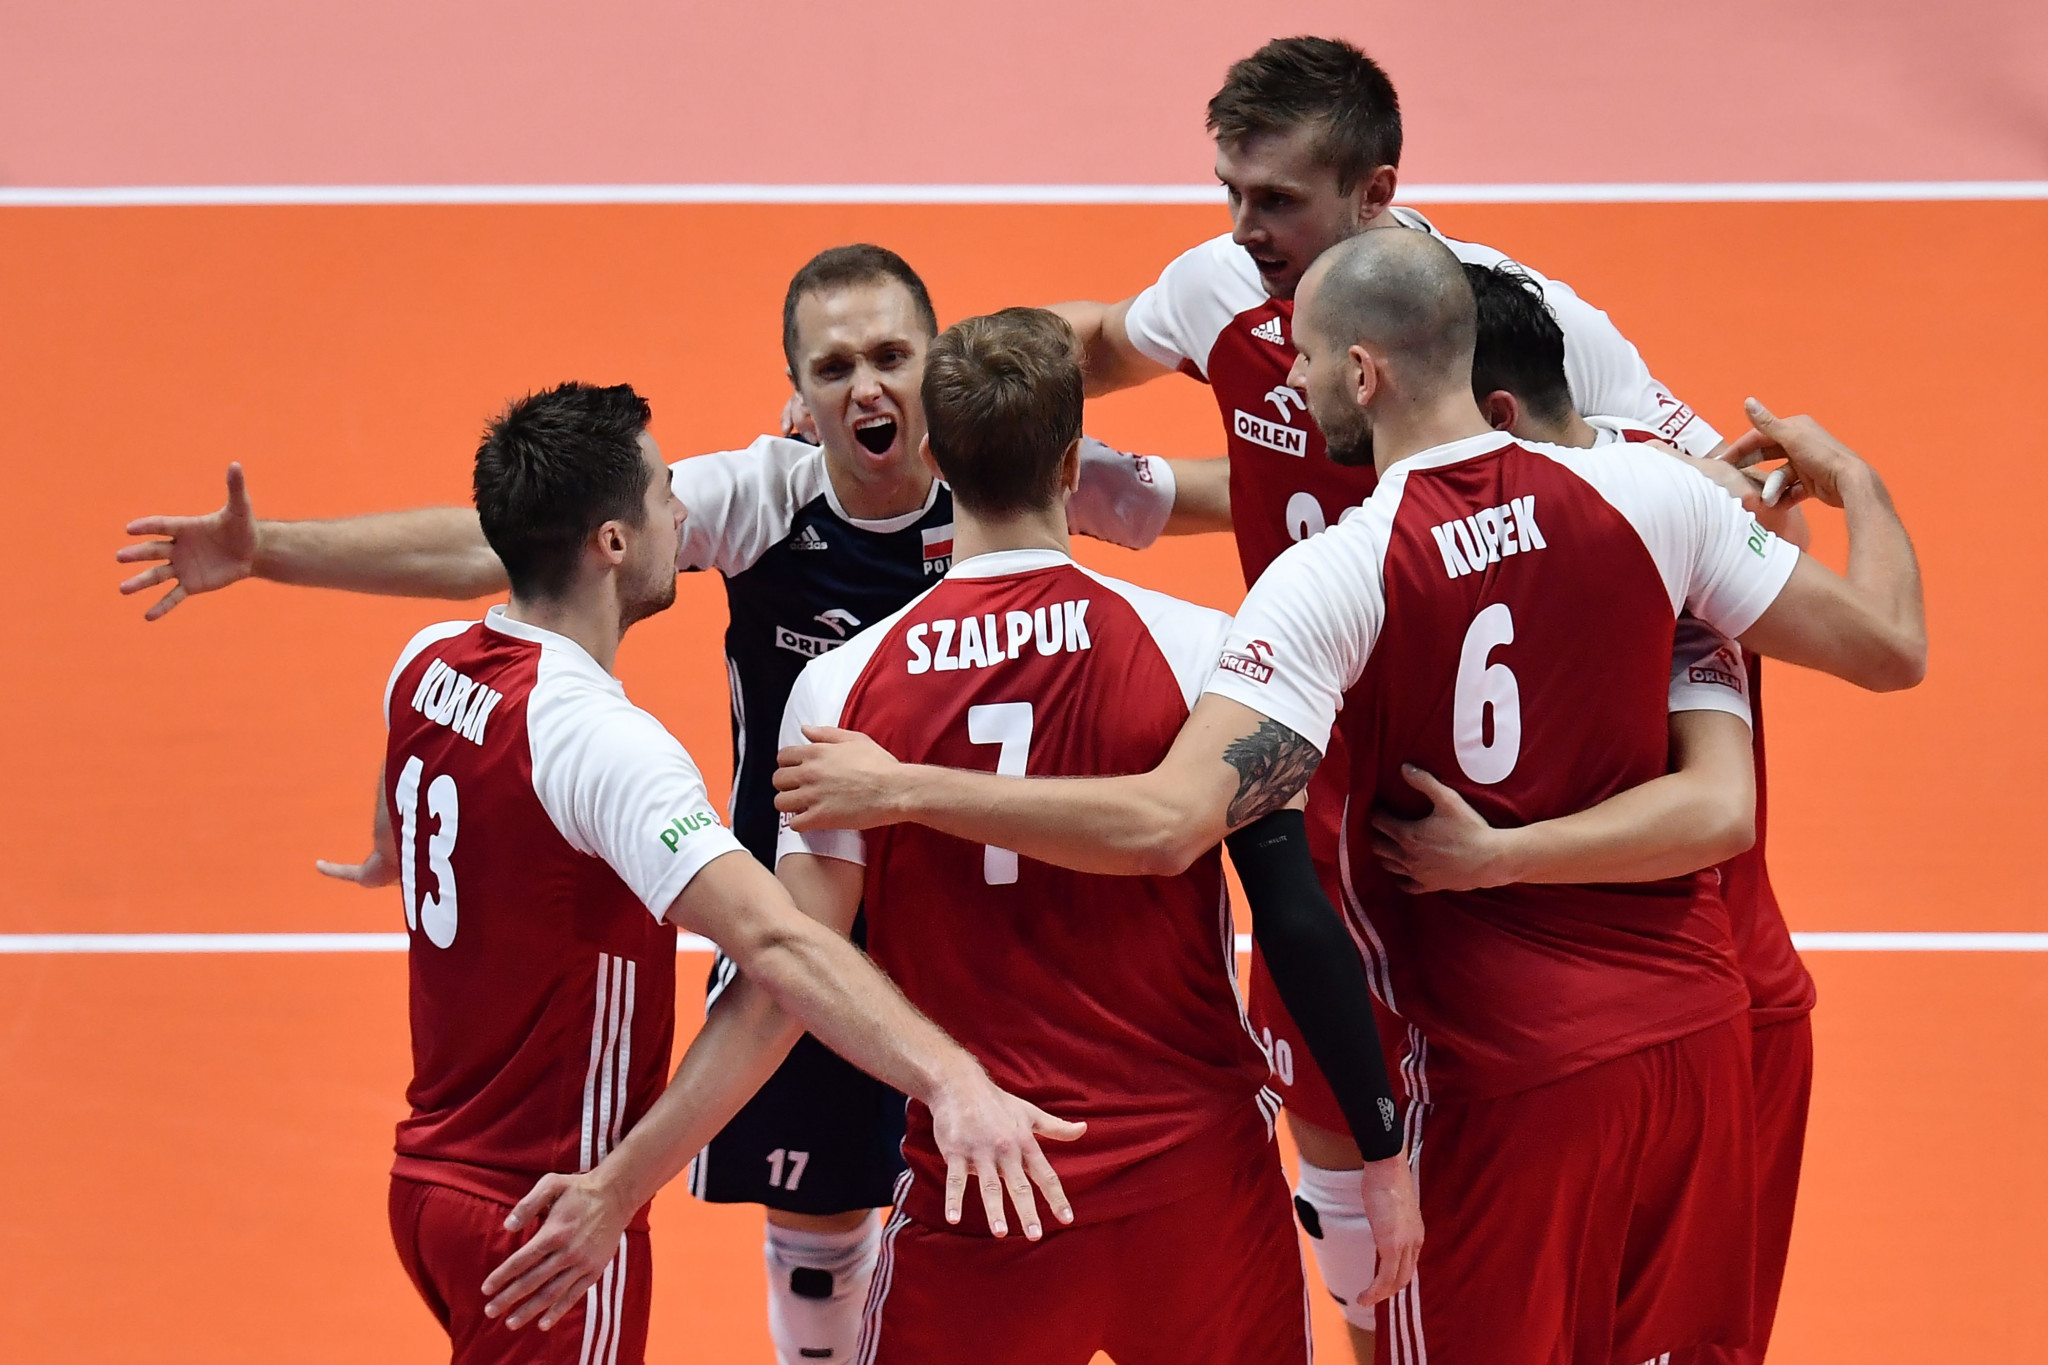 Reigning champions Poland are set to host this year's Men's World Championship with Slovenia ©Getty Images